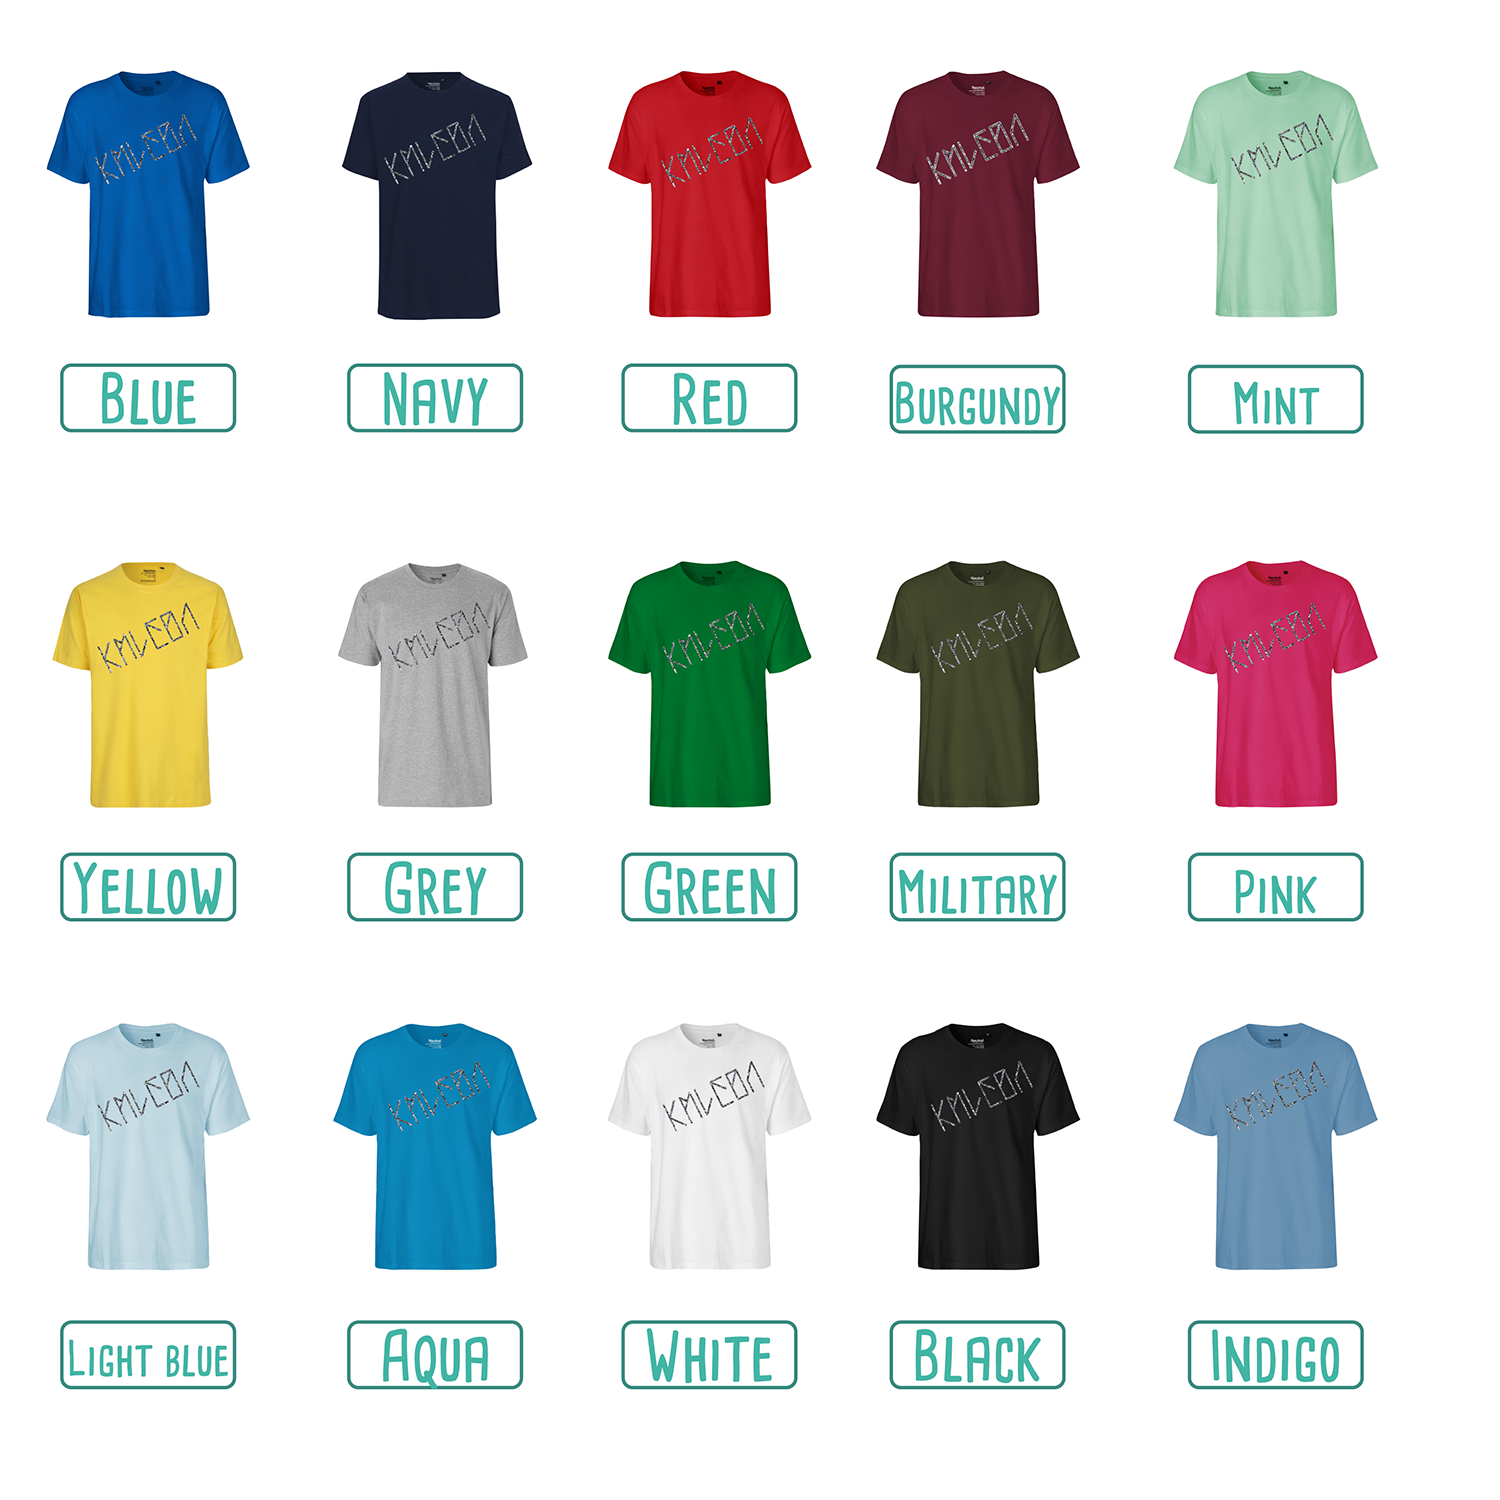 Colour options for adult shirts with short sleeves by KMLeon.